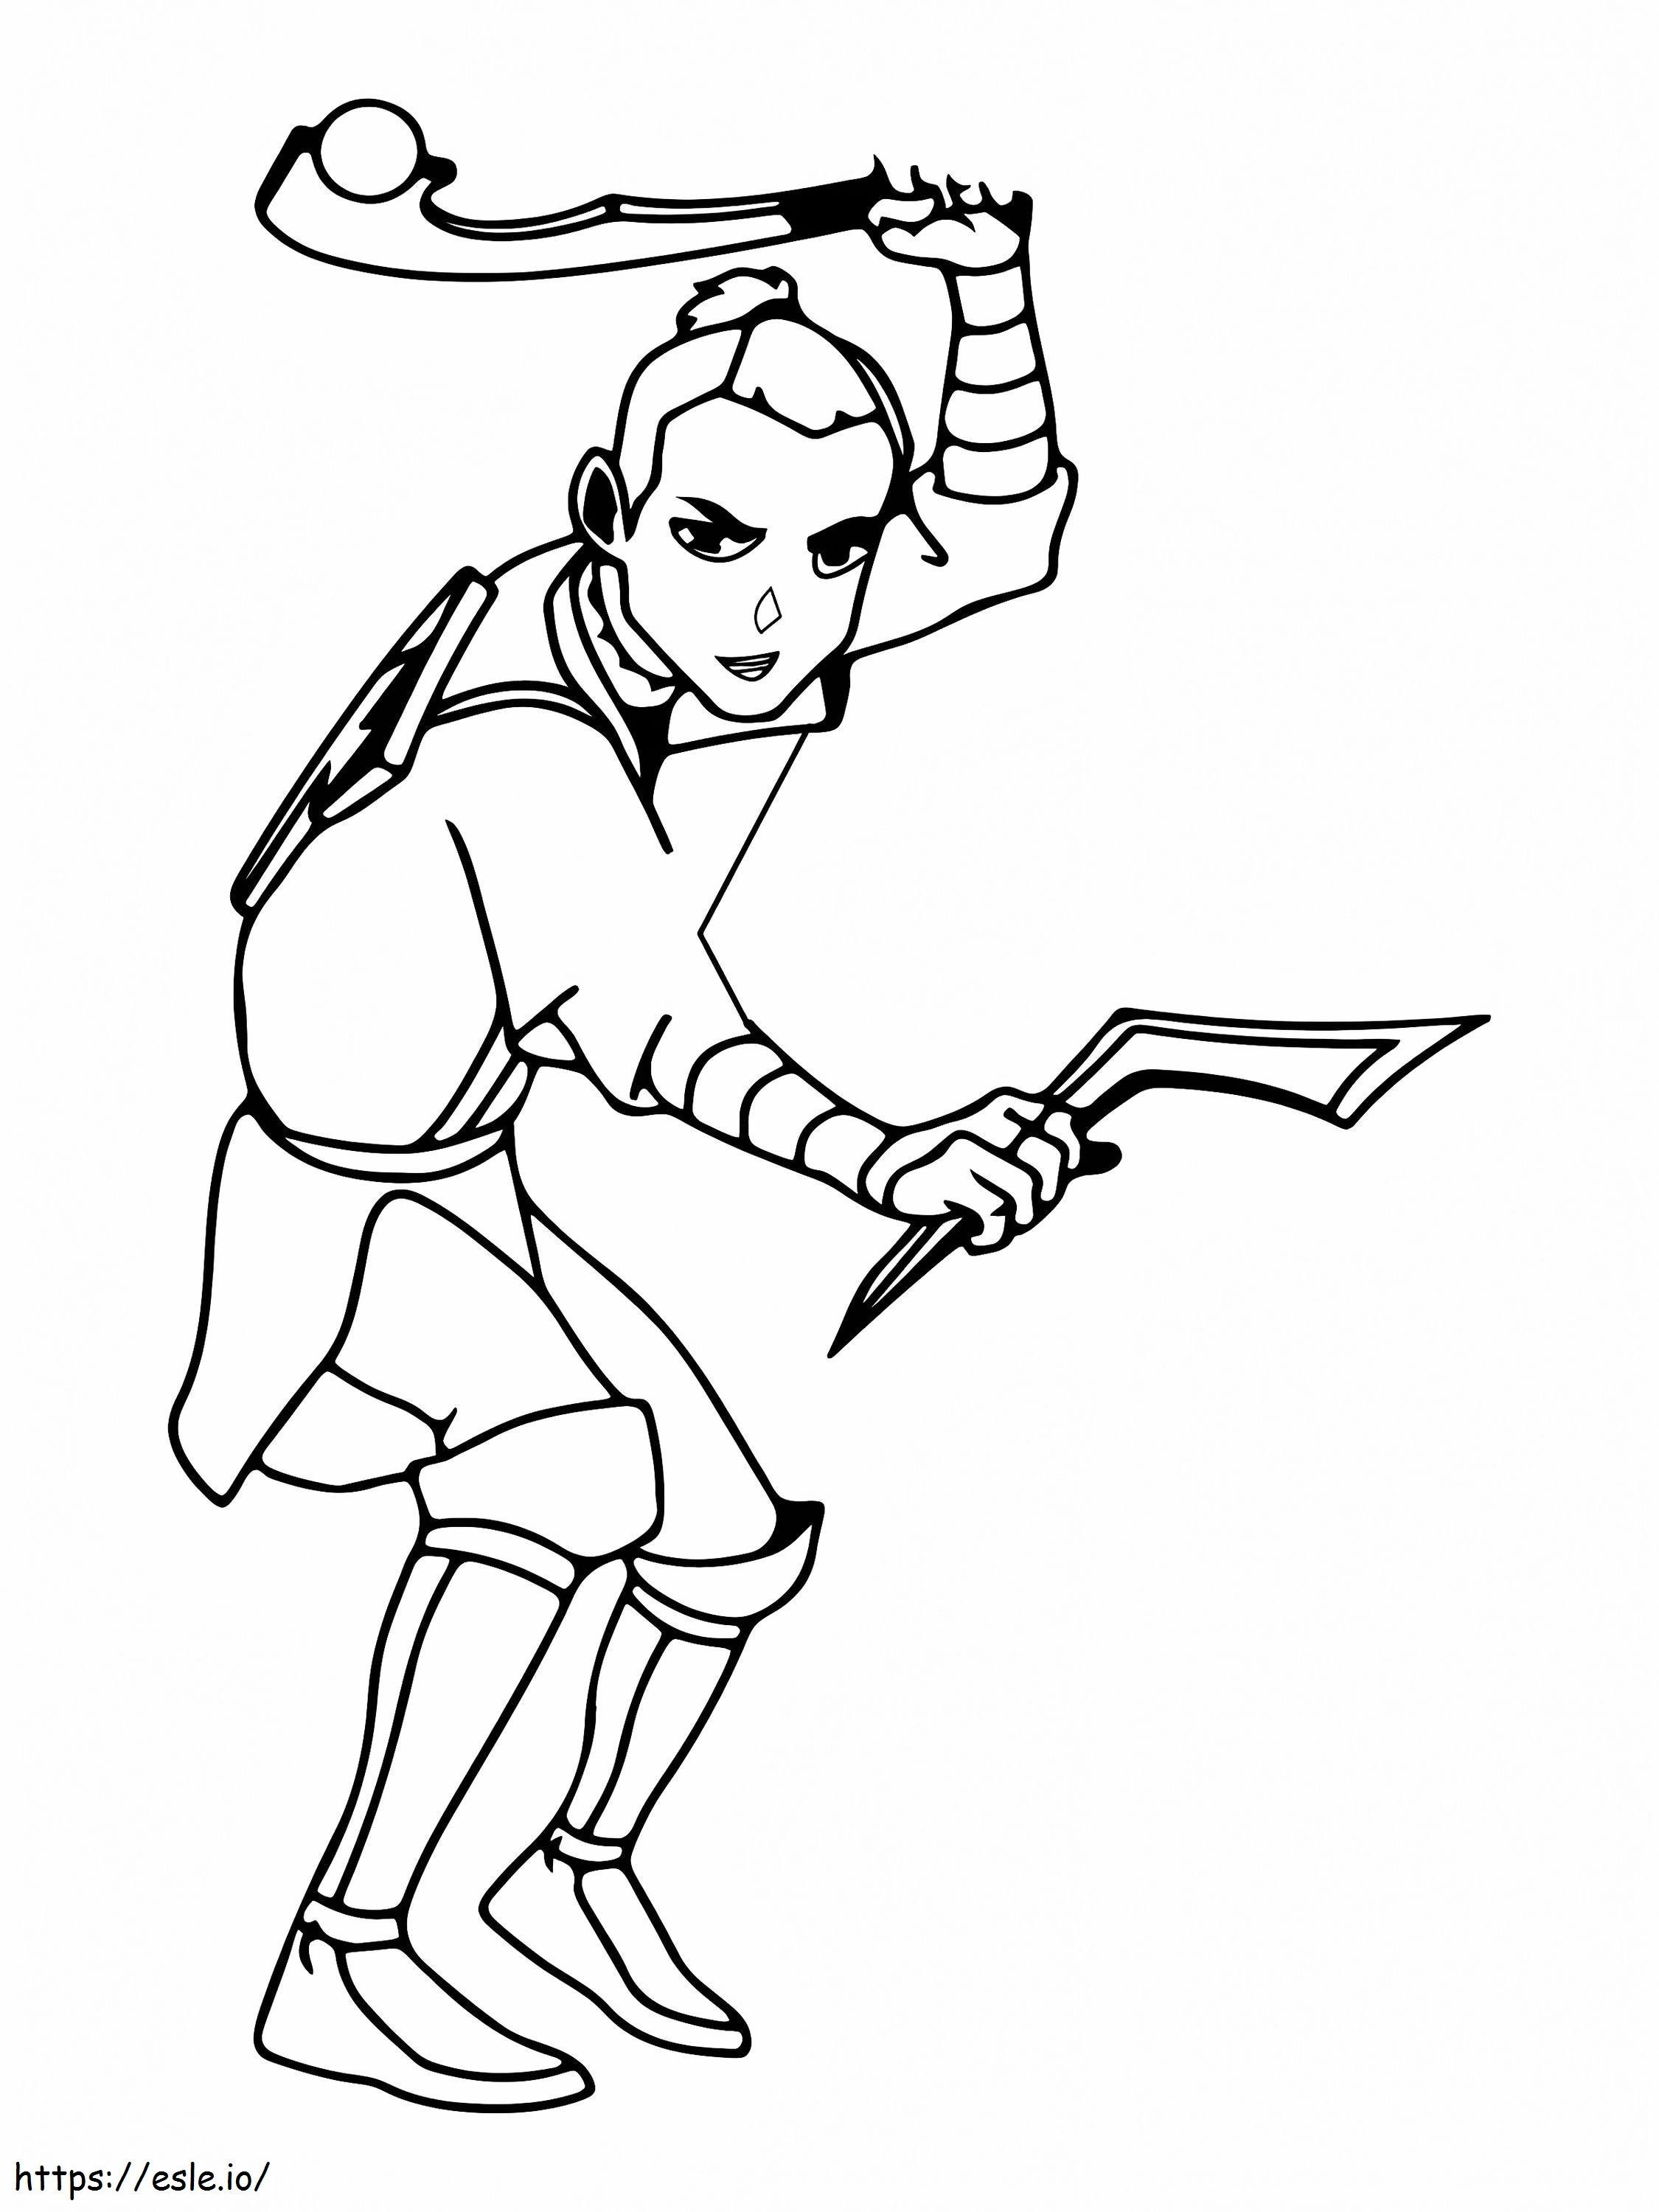 Sokka Fighting The Legend Of Korra coloring page